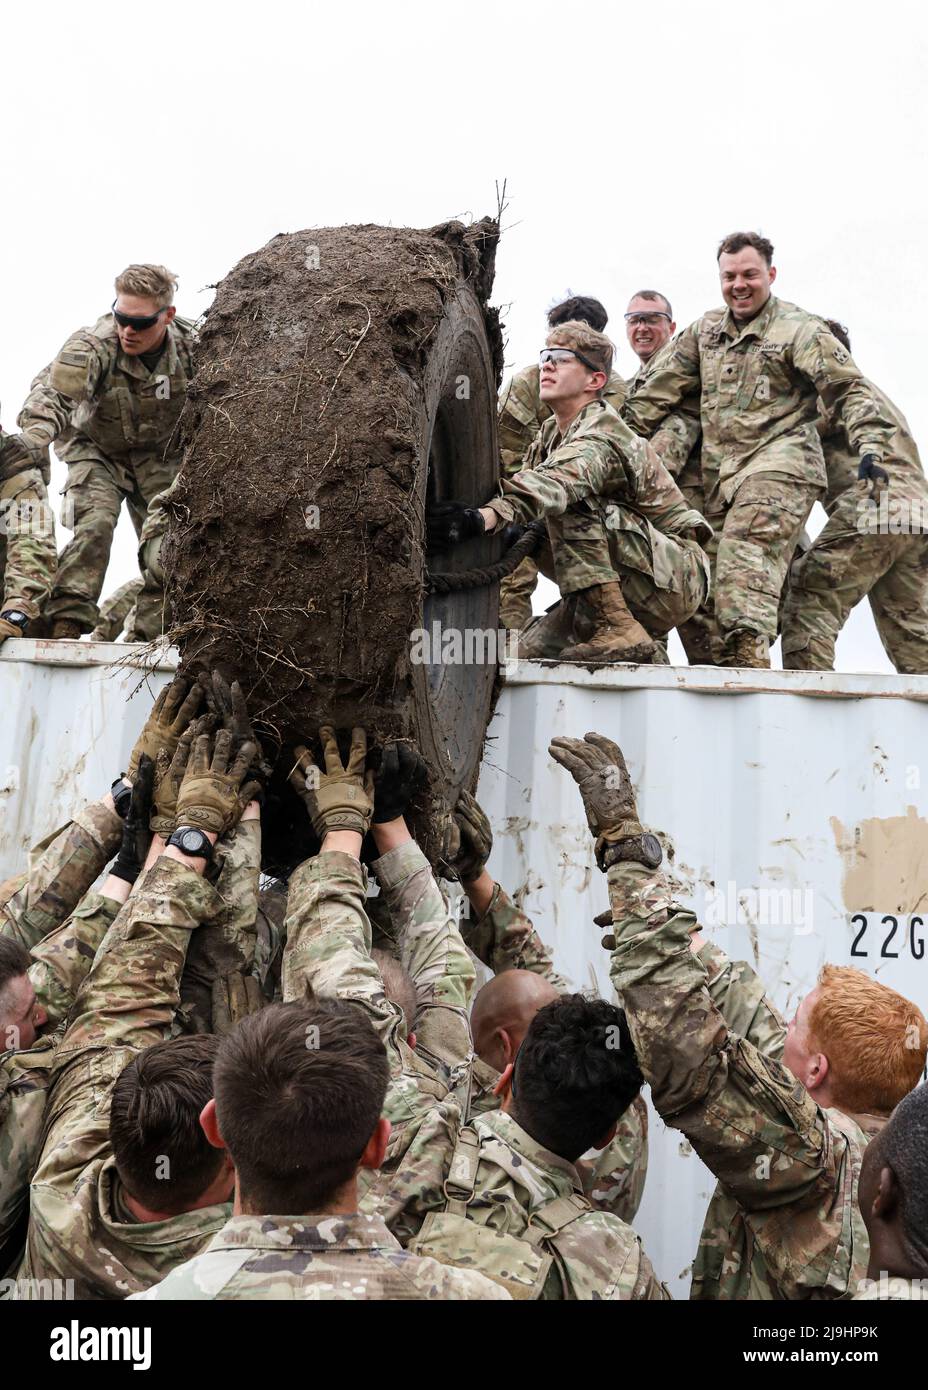 Fort Carson, United States. 23rd May, 2022. U.S. Army soldiers assigned to the 4th Infantry Division, help thrust a giant tire over a muddy container wall during the Utah Beach challenge event at Fort Carson, May 23, 2022 in Fort Carson, Colorado. The event held during Ivy Week requires teams of soldiers to carry a 300-pound tire over a muddy obstacle course. Credit: SSgt. Matthew Lumagui/U.S. Army/Alamy Live News Stock Photo